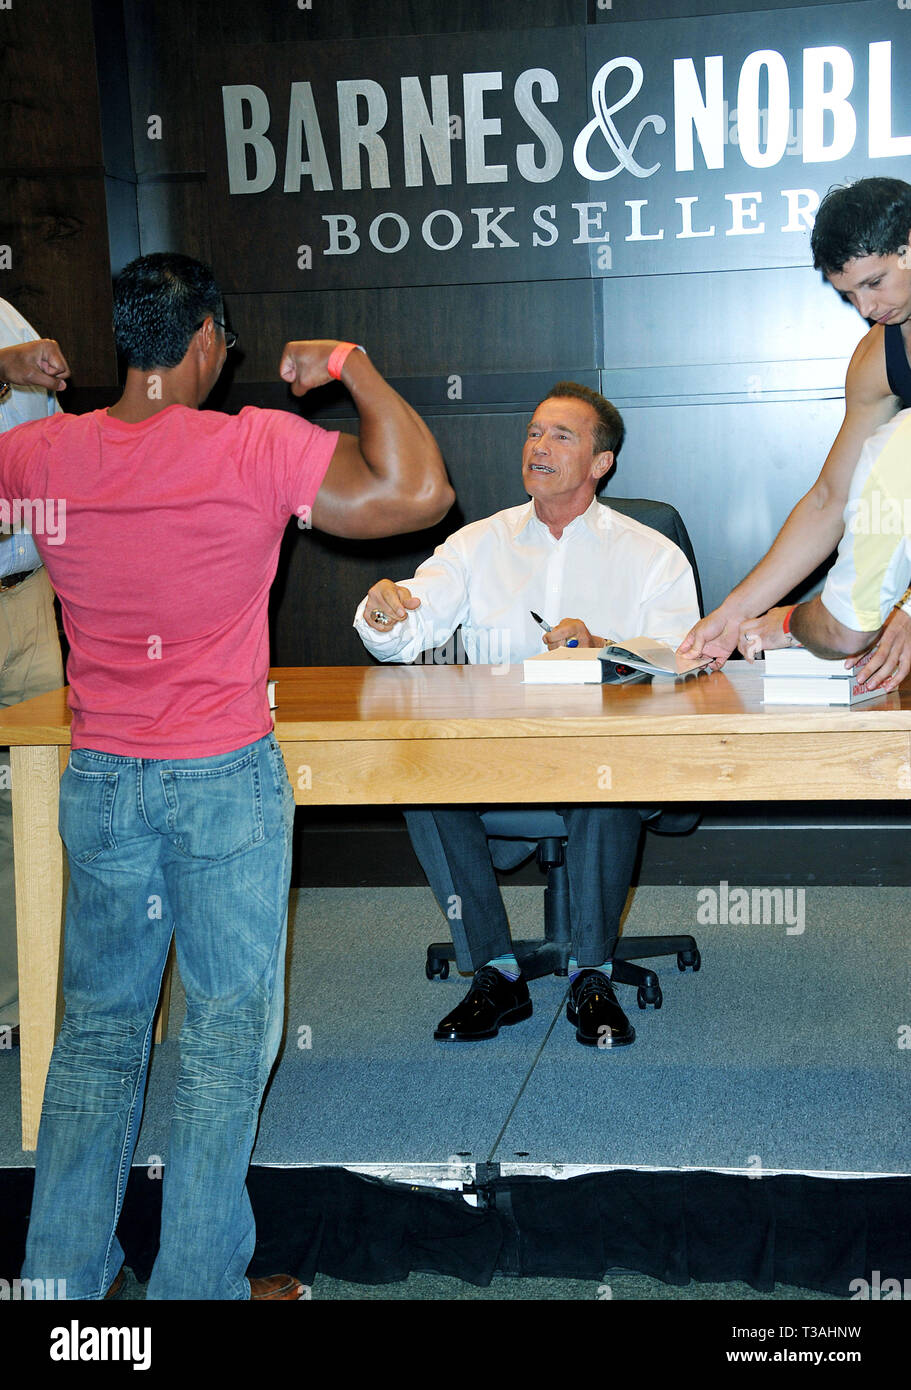 https://c8.alamy.com/comp/T3AHNW/arnold-schwarzeneger-total-recall-my-unbelievably-true-life-story-book-signing-at-barnes-noble-book-store-at-the-grove-in-los-angelesa-arnold-schwarzenegger-book-signing-20-event-in-hollywood-life-california-red-carpet-event-usa-film-industry-celebrities-photography-bestof-arts-culture-and-entertainment-topix-celebrities-fashion-best-of-hollywood-life-event-in-hollywood-life-california-red-carpet-and-backstage-movie-celebrities-tv-celebrities-music-celebrities-topix-actors-from-the-same-movie-cast-and-co-star-together-inquiry-tsuni@gamma-usacom-credit-tsuni-T3AHNW.jpg